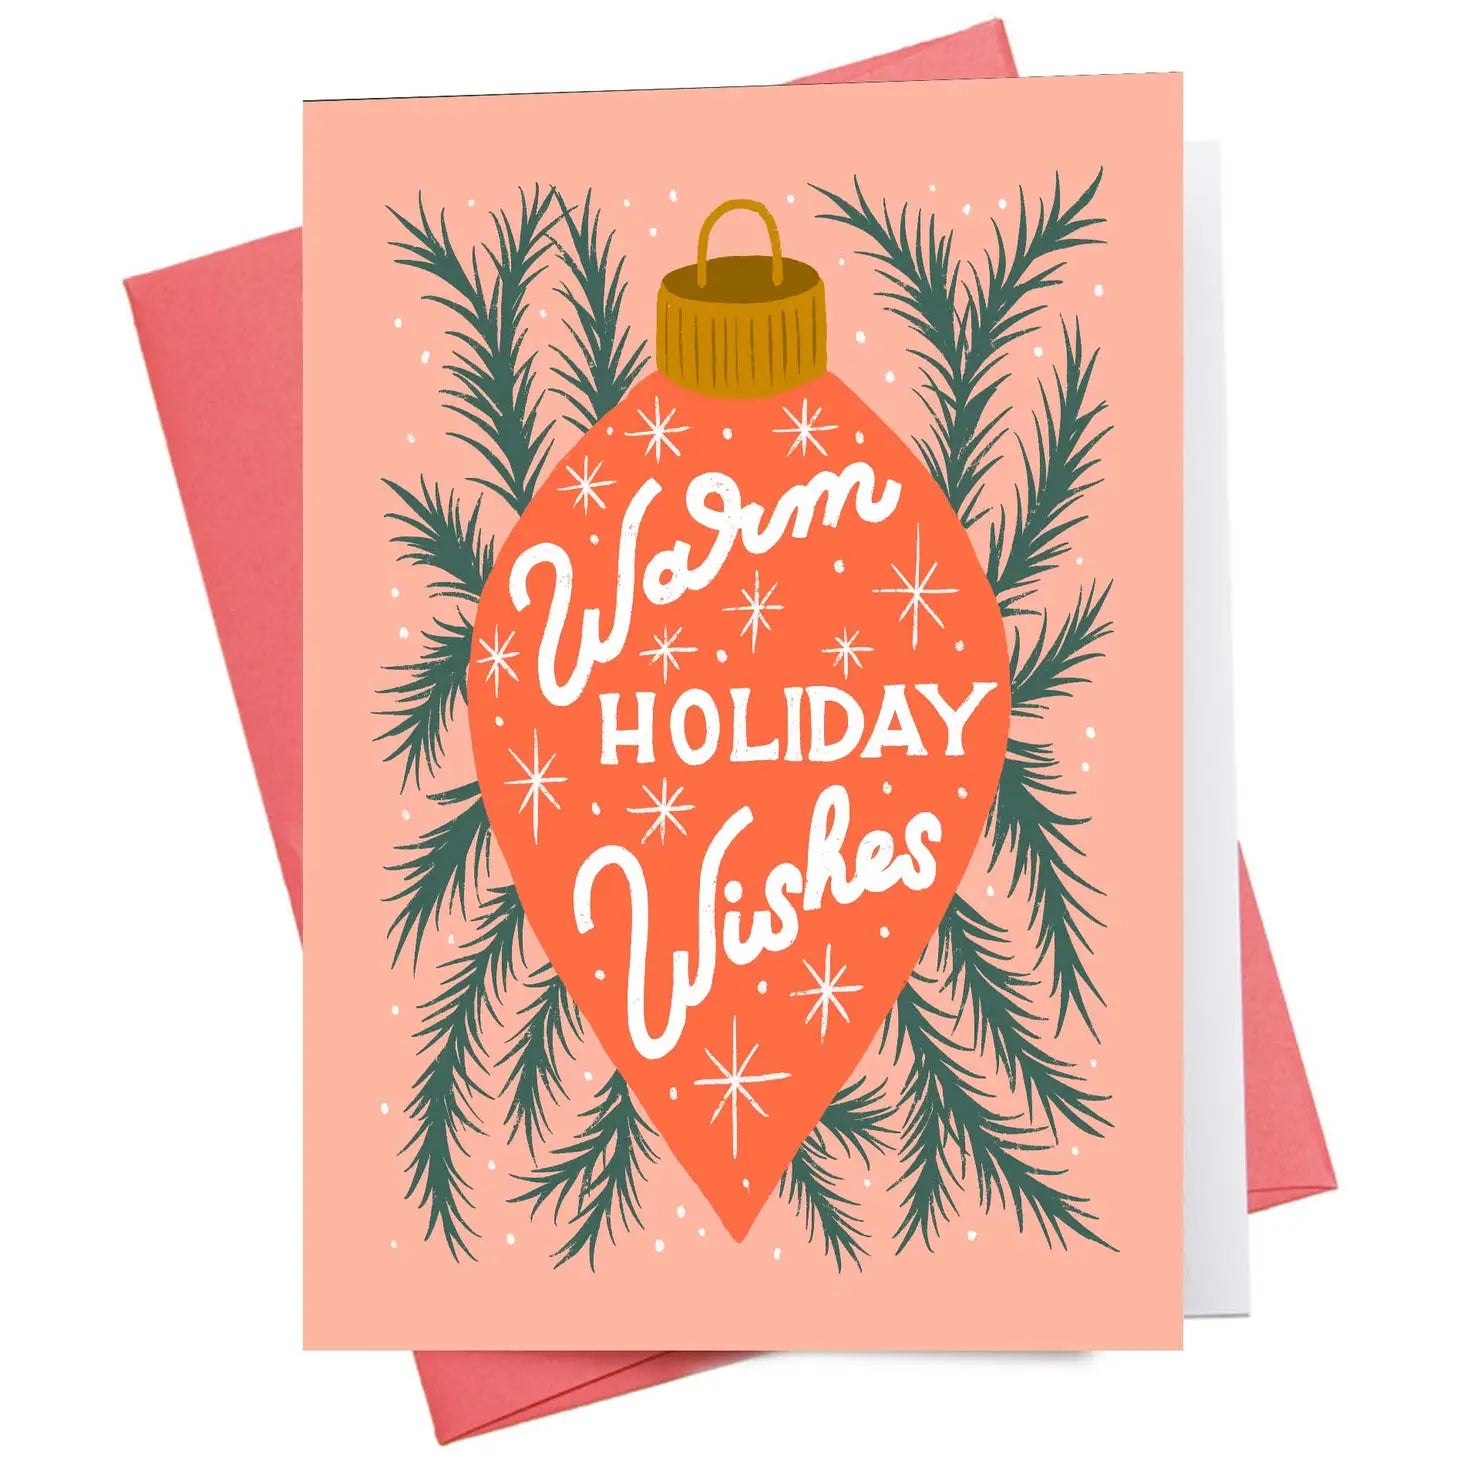 Inkwell Cards "Warm Holiday Wishes" Card